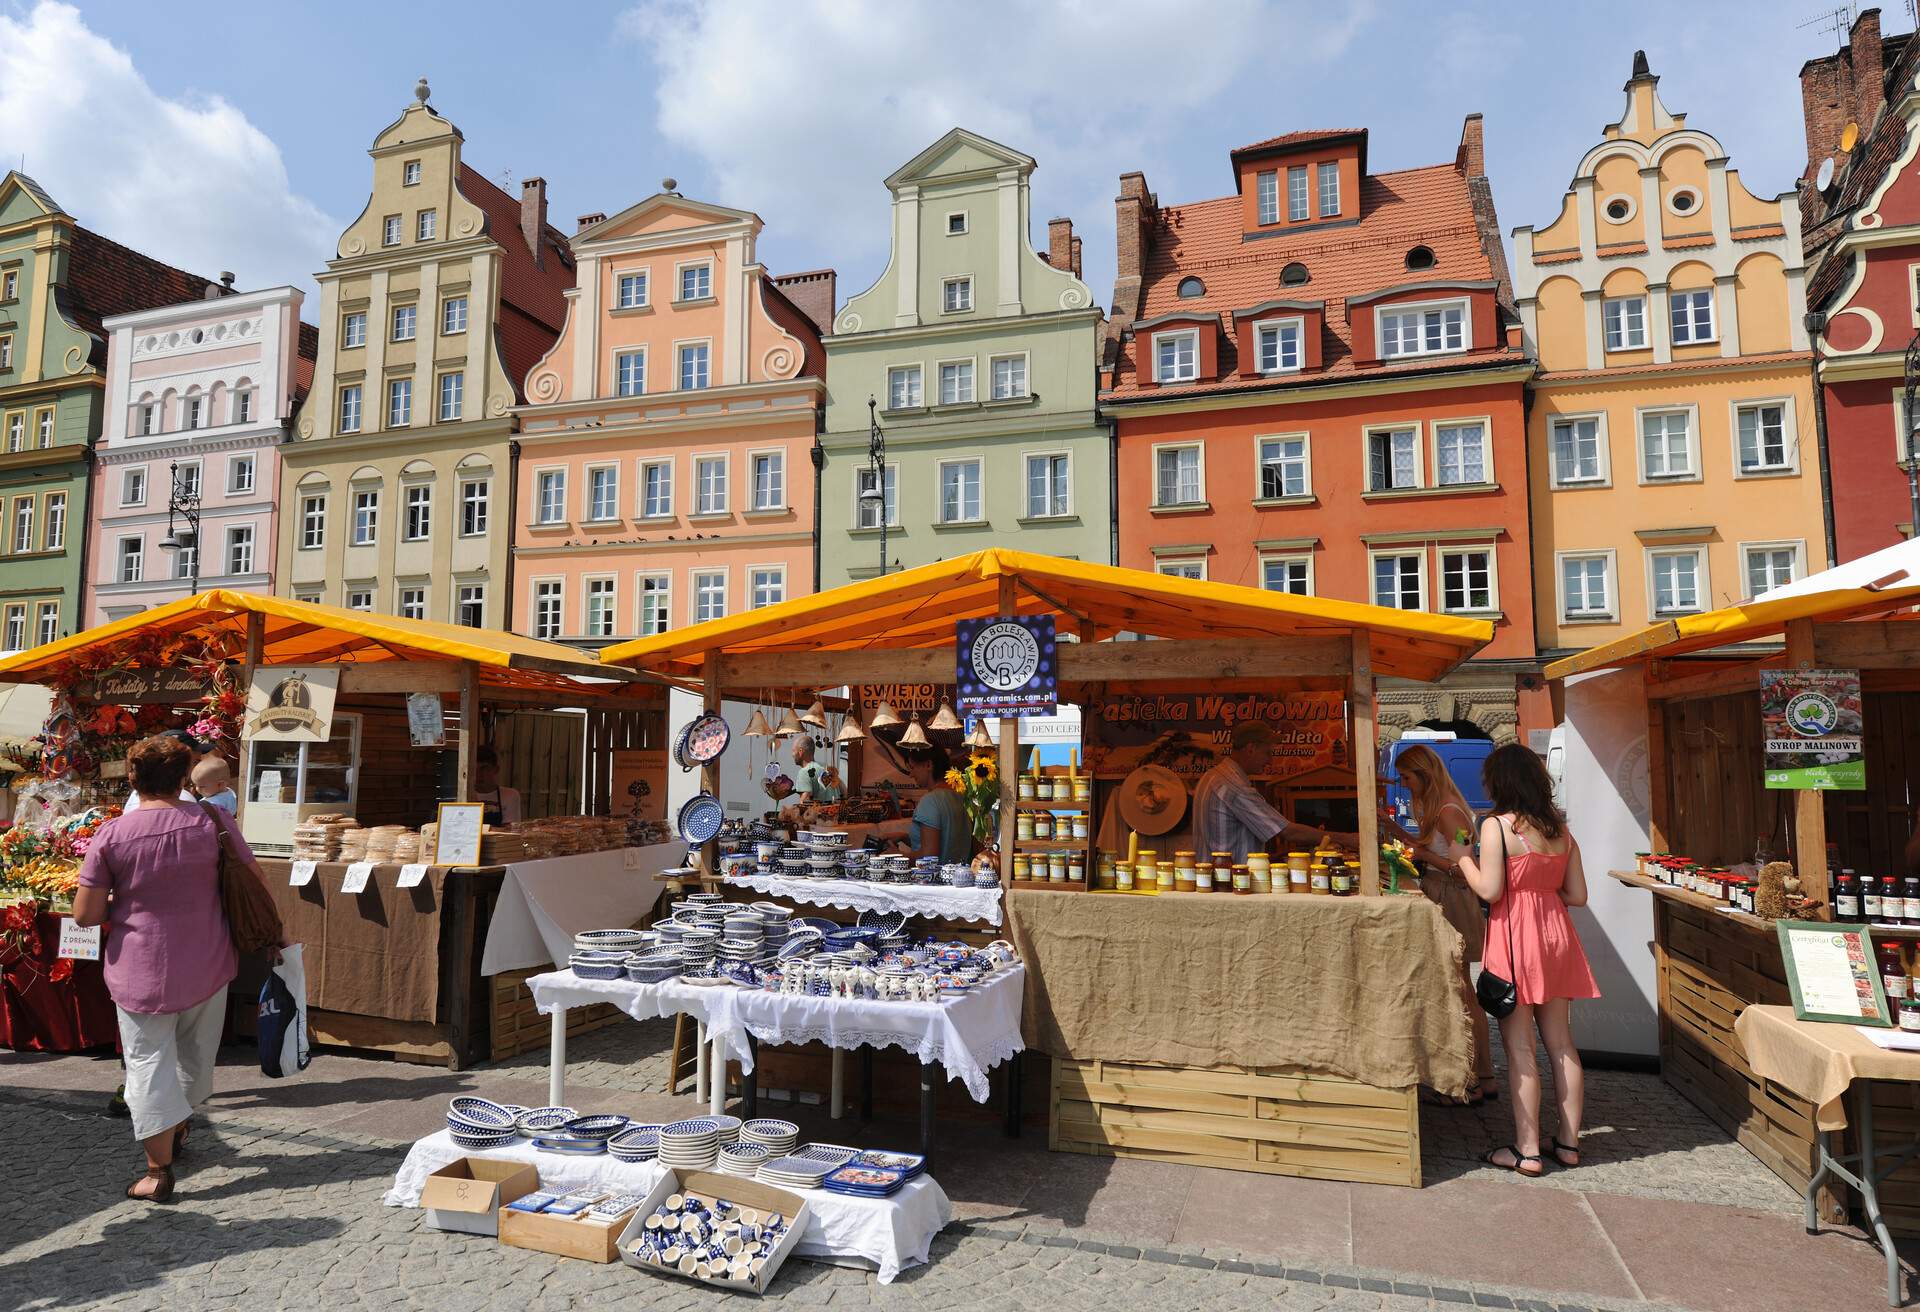 Market stalls in Salt Square, Plac Solny, including traditional pottery, honey and flowers. 